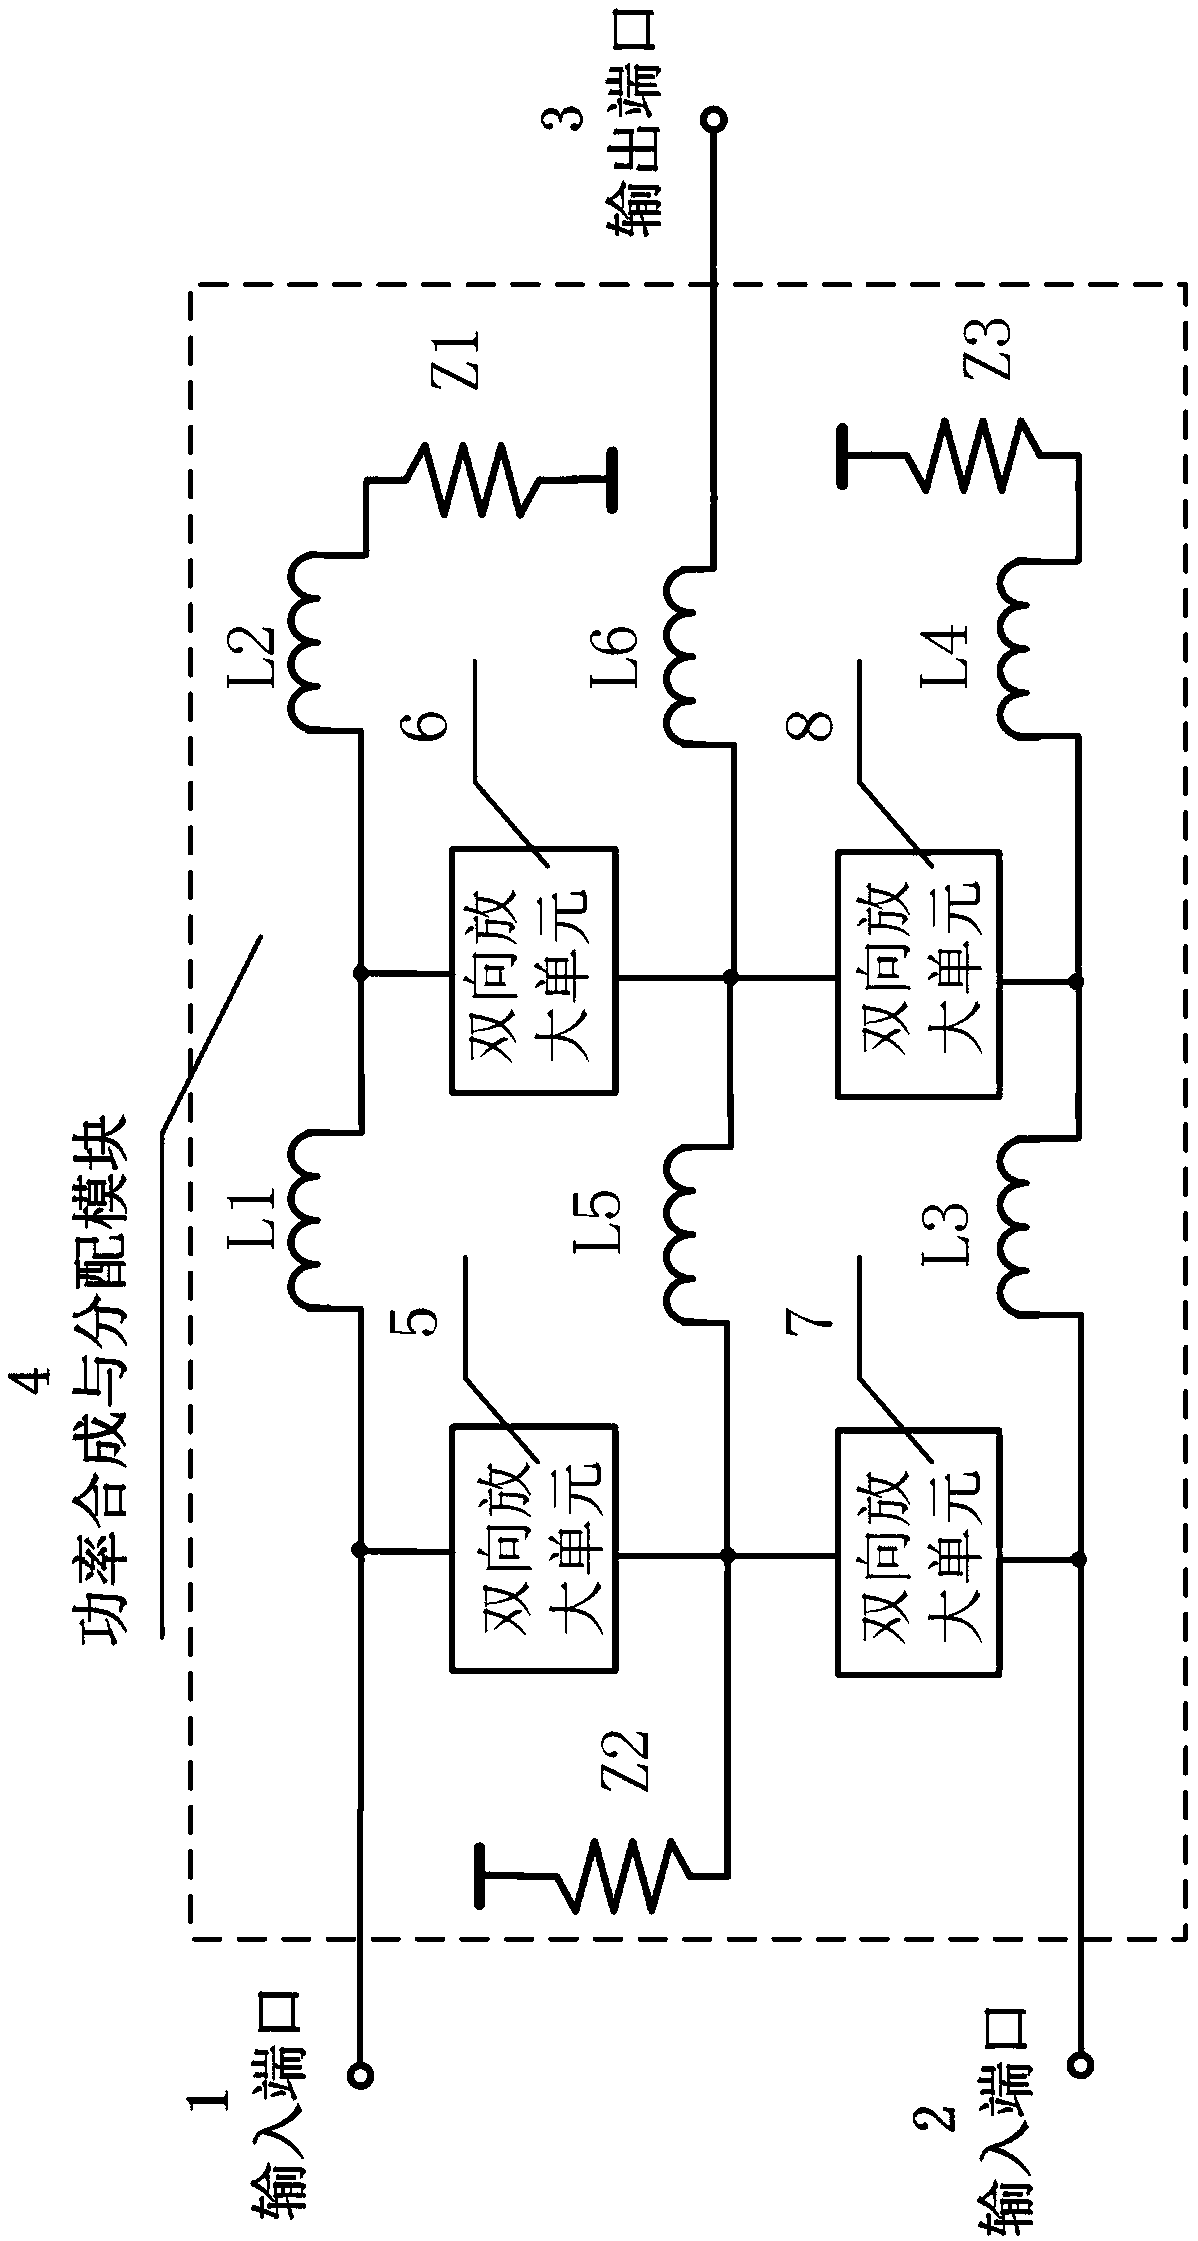 Power synthesis distributor applied to communication system of frequency band lower than 25GHz